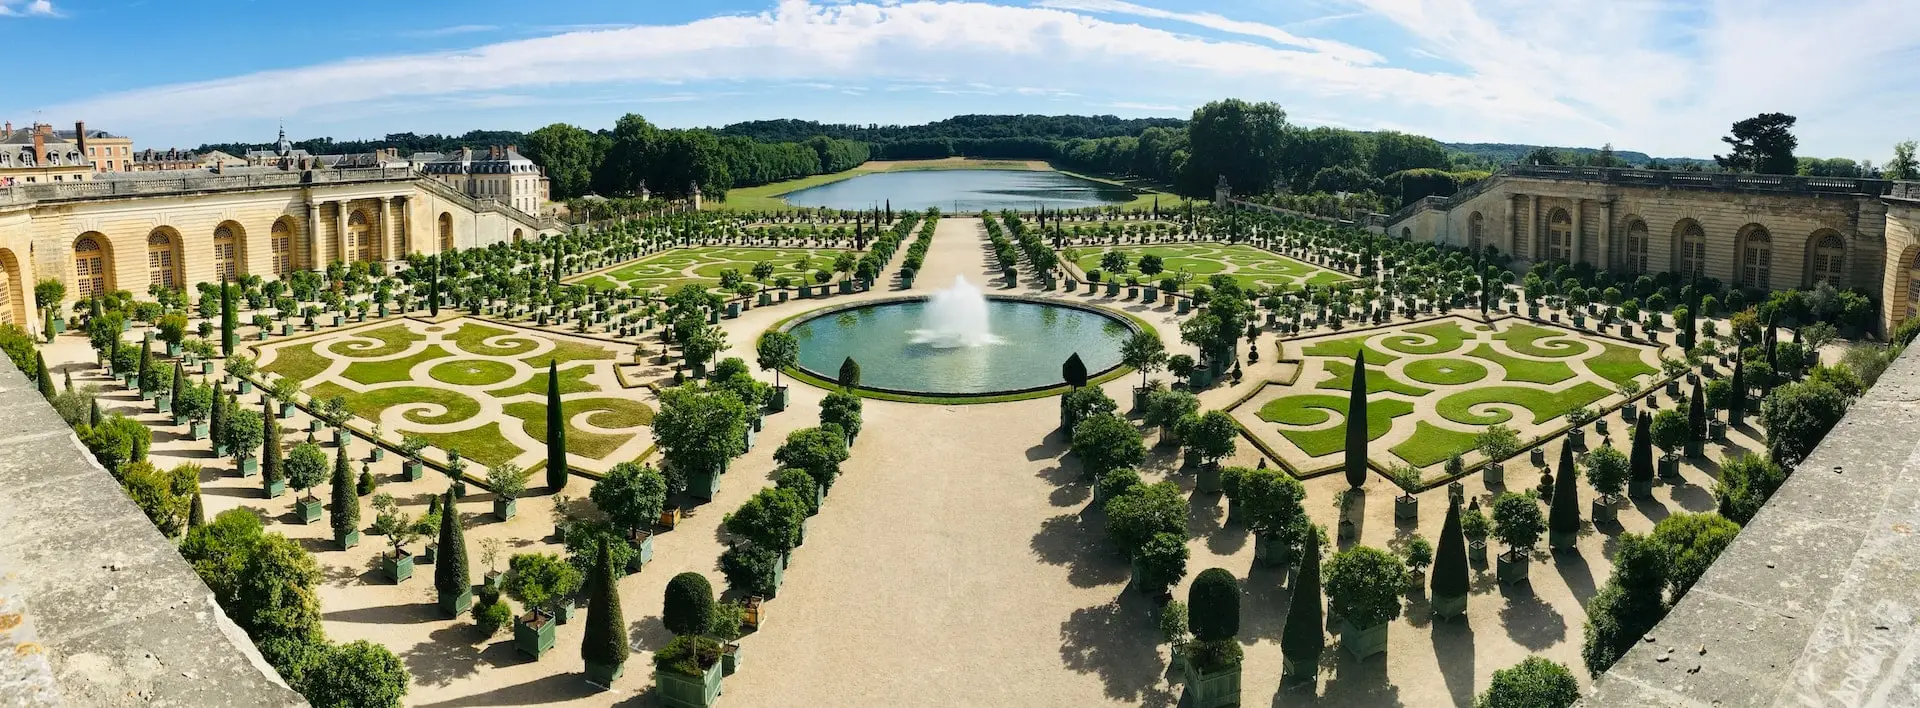 The enchanting gardens of the Palace of Versailles.